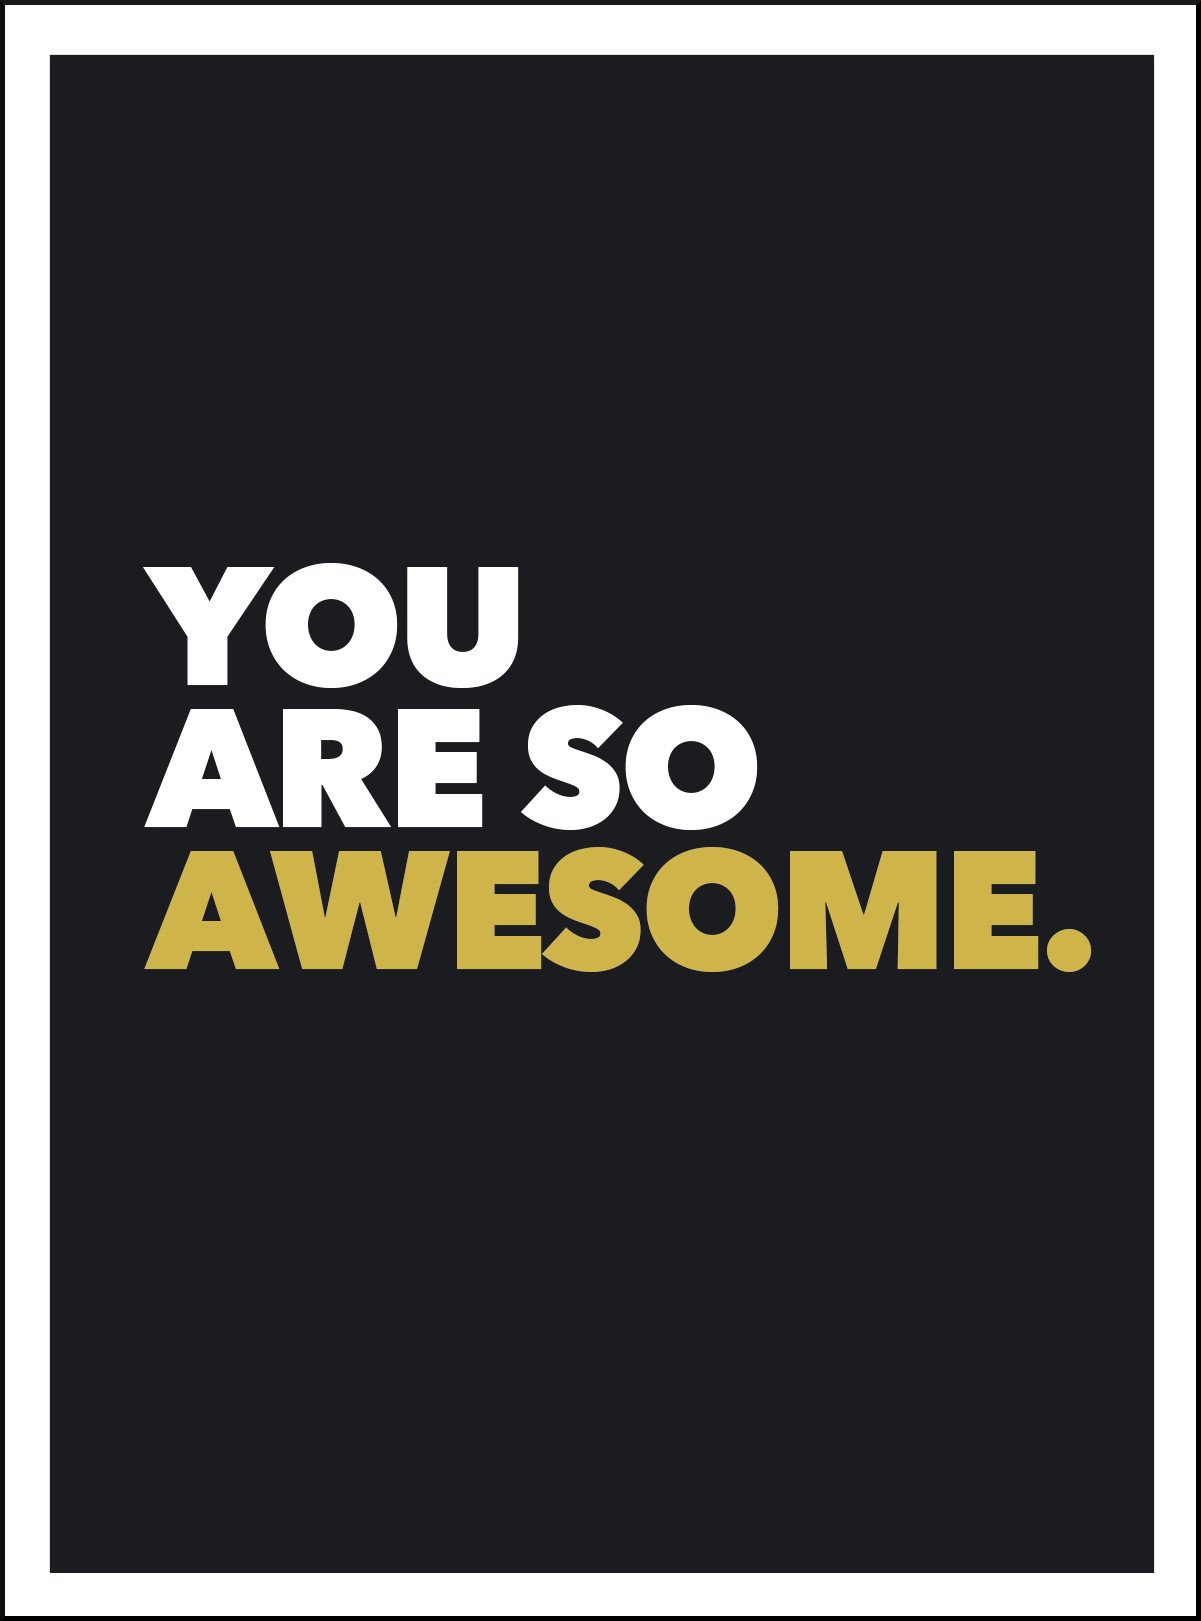 You Are so Awesome